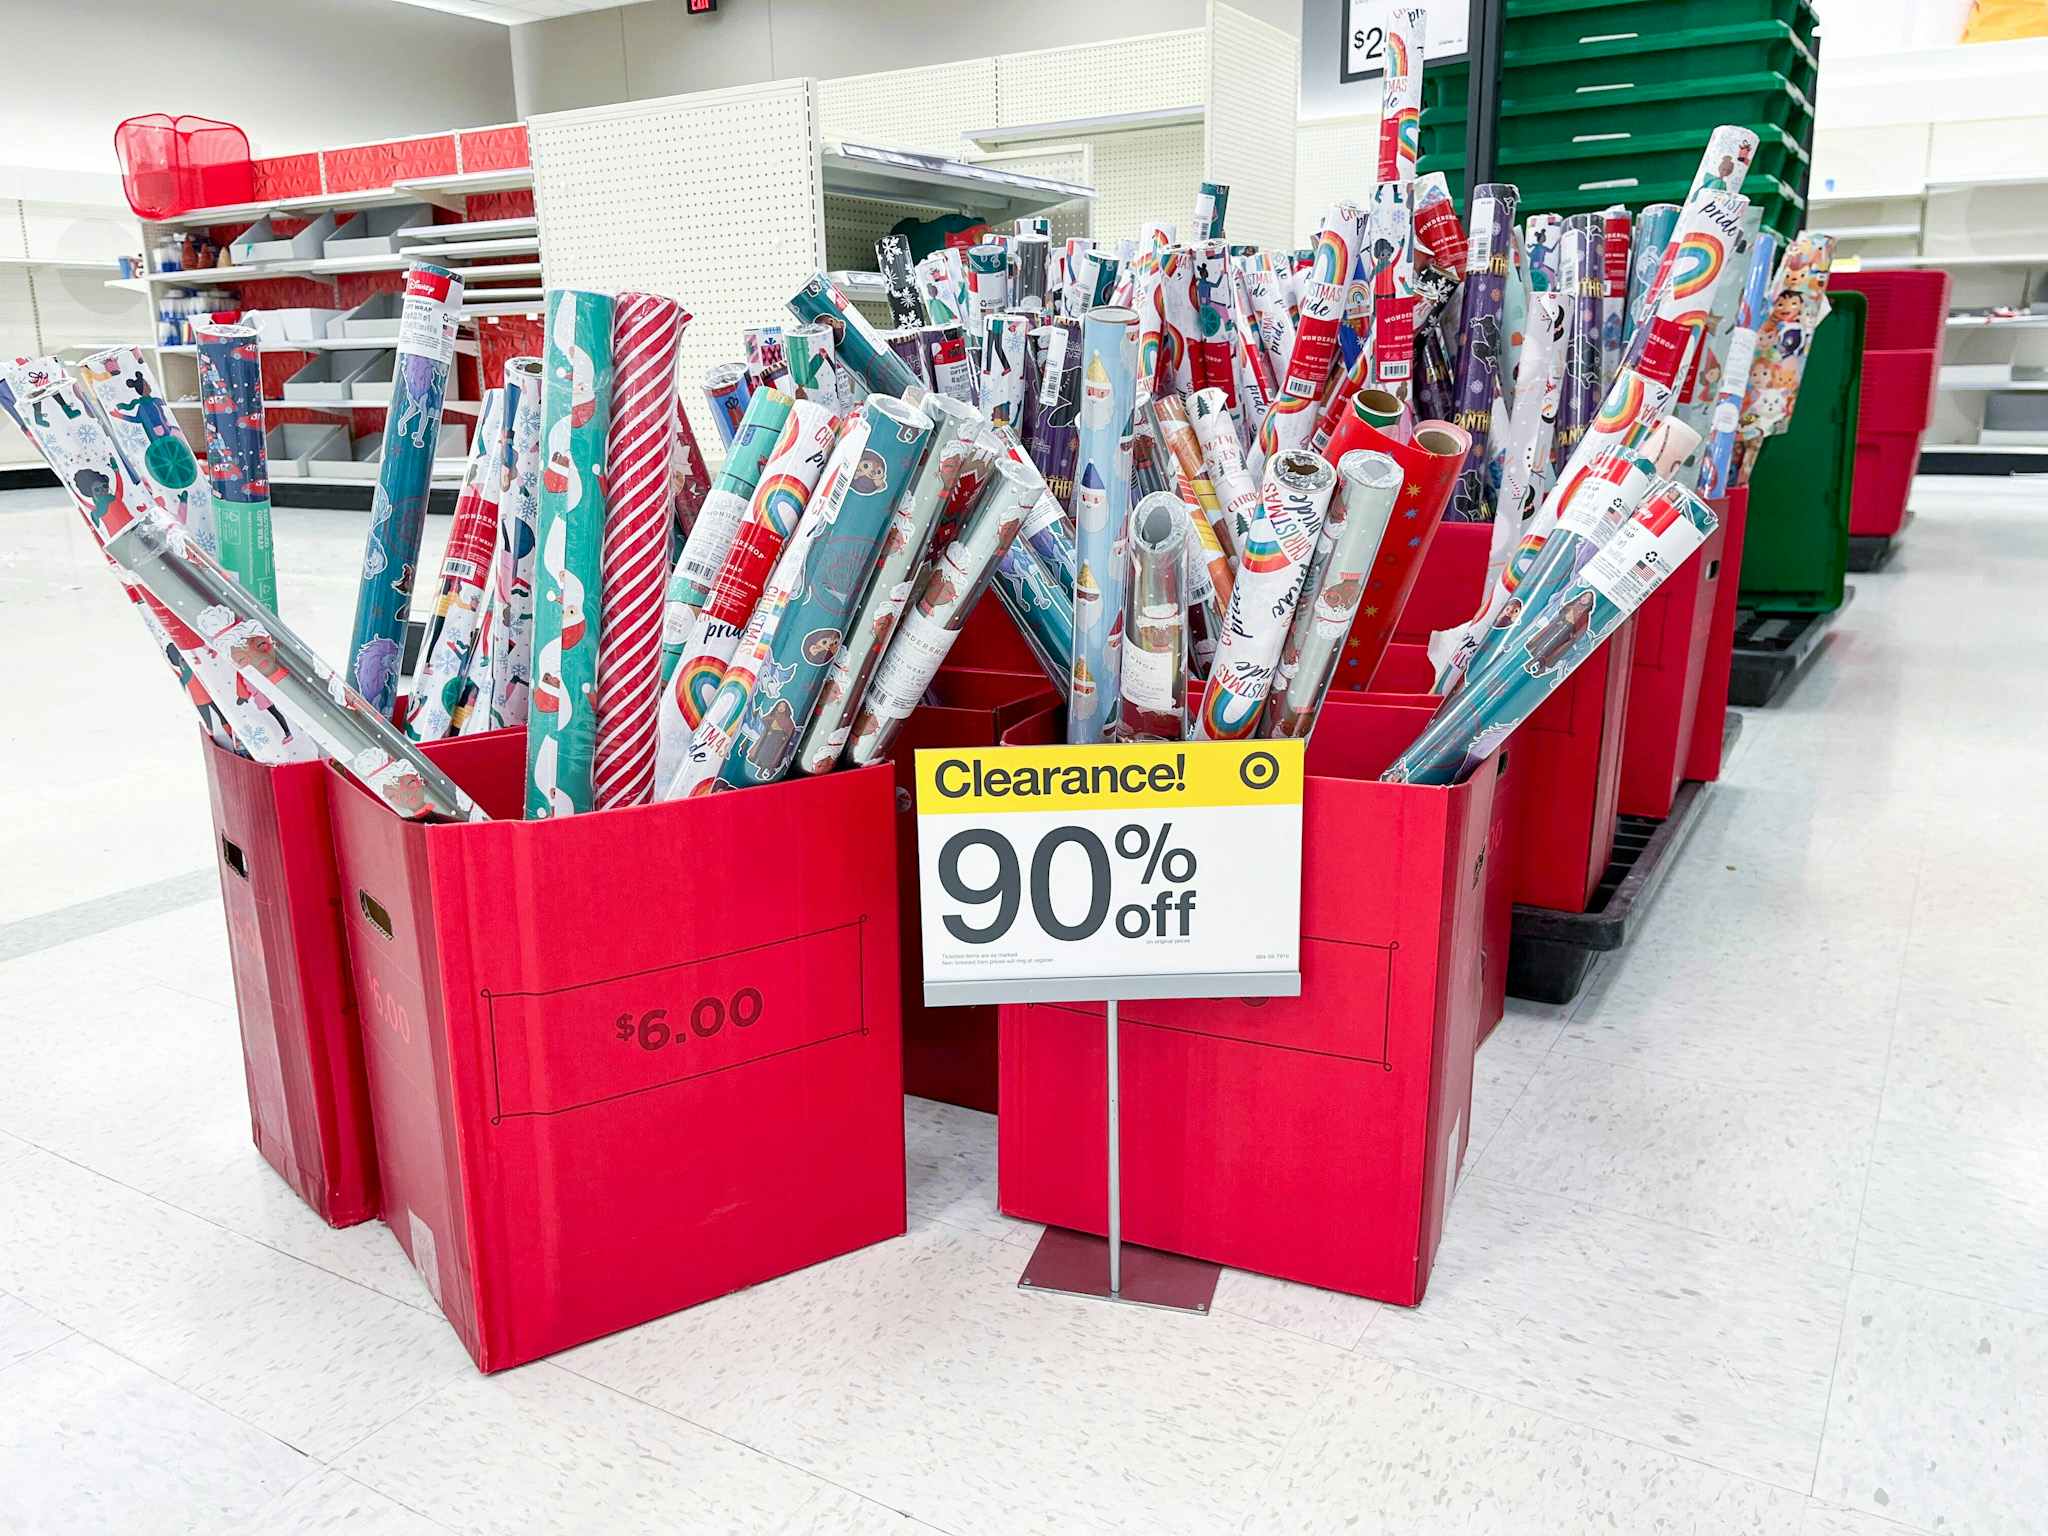 Wrapping paper boxes for 90% off during the Target after Christmas clearance sale.